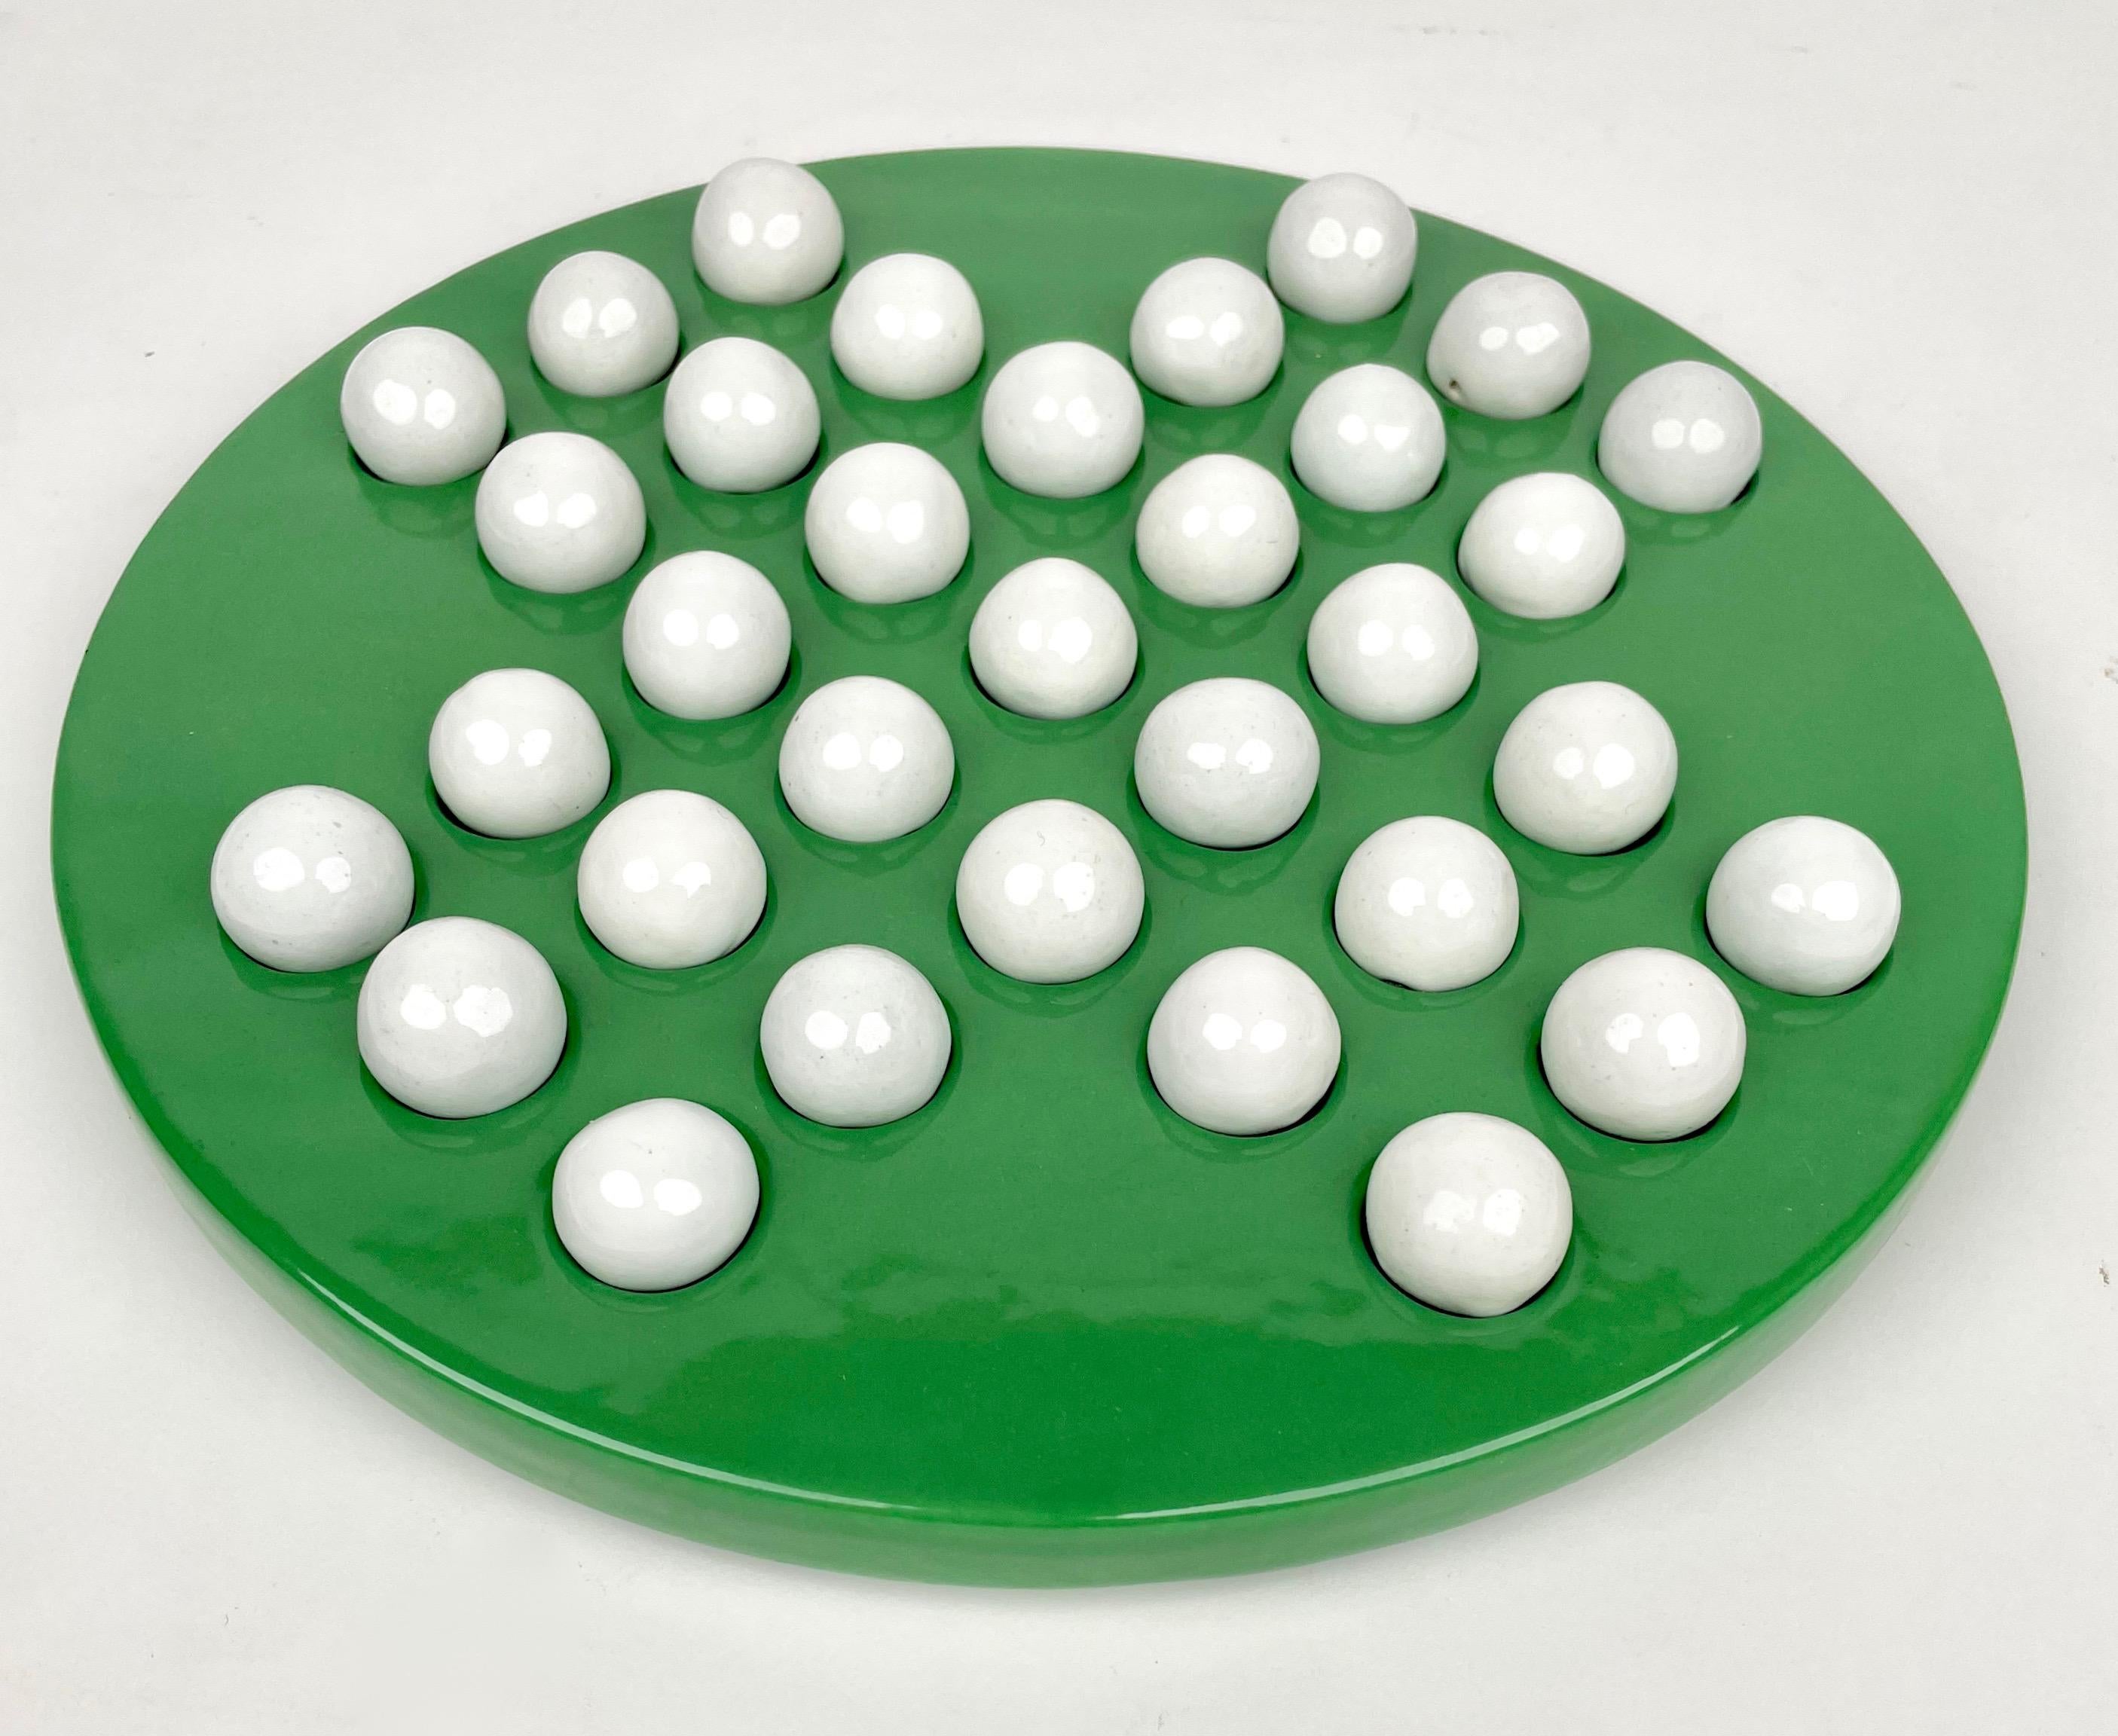 Vintage checkers game by the Italian designer Ennio Lucini for Gabbianelli in green and white ceramic.

Made in Italy in the 1970s.